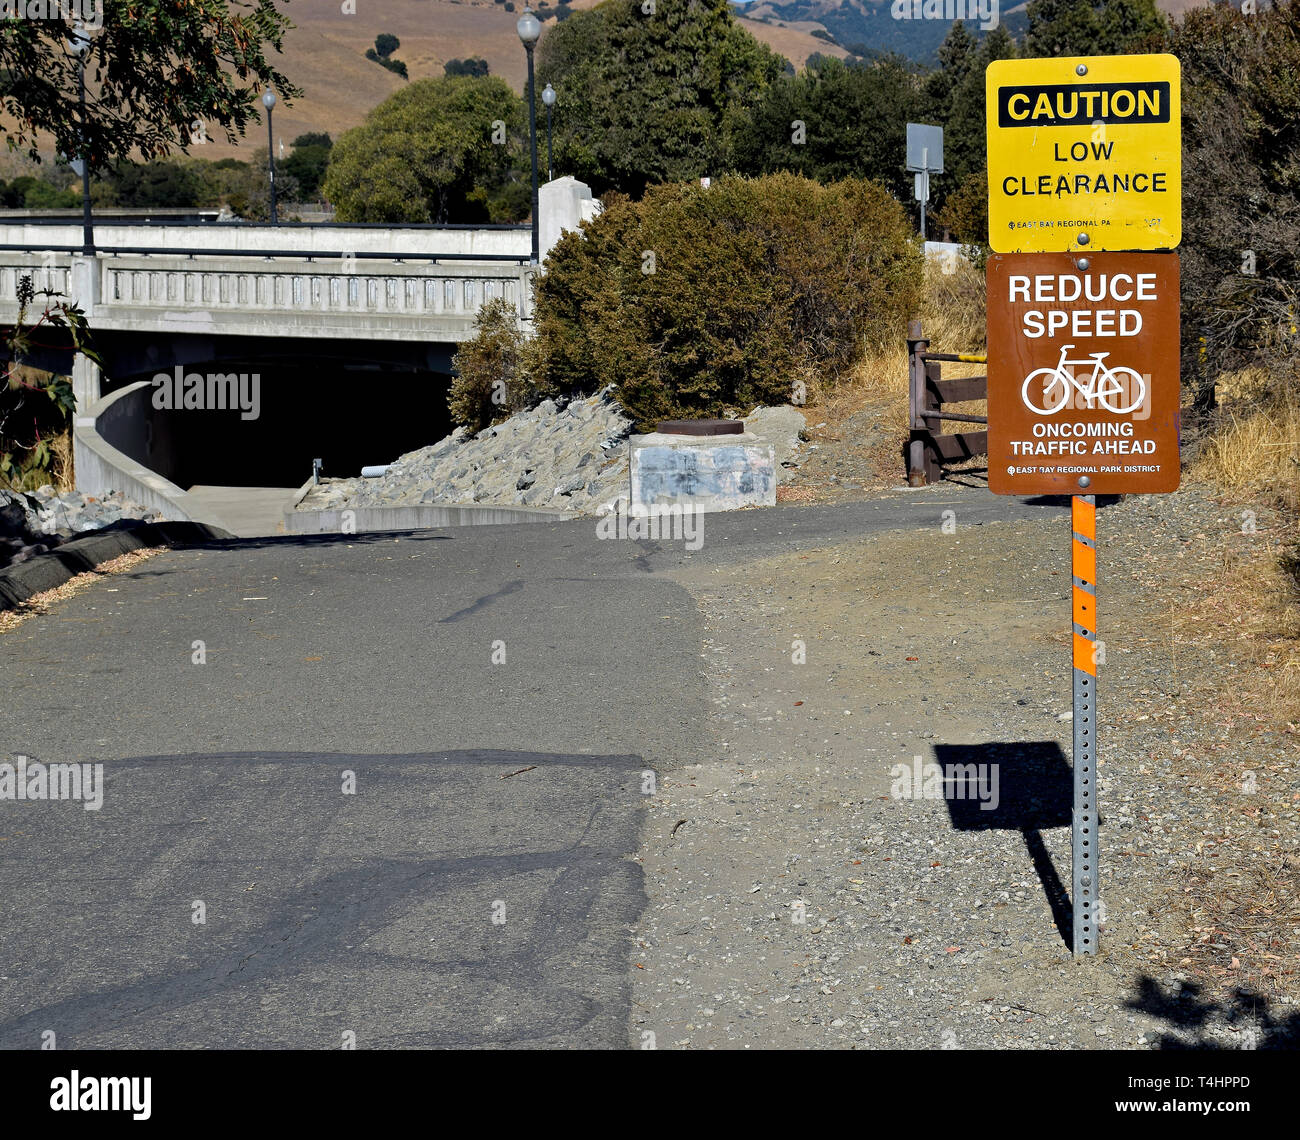 Alameda Creek Trail signs for bicycles to reduce speed and caution low clearance,  California Stock Photo